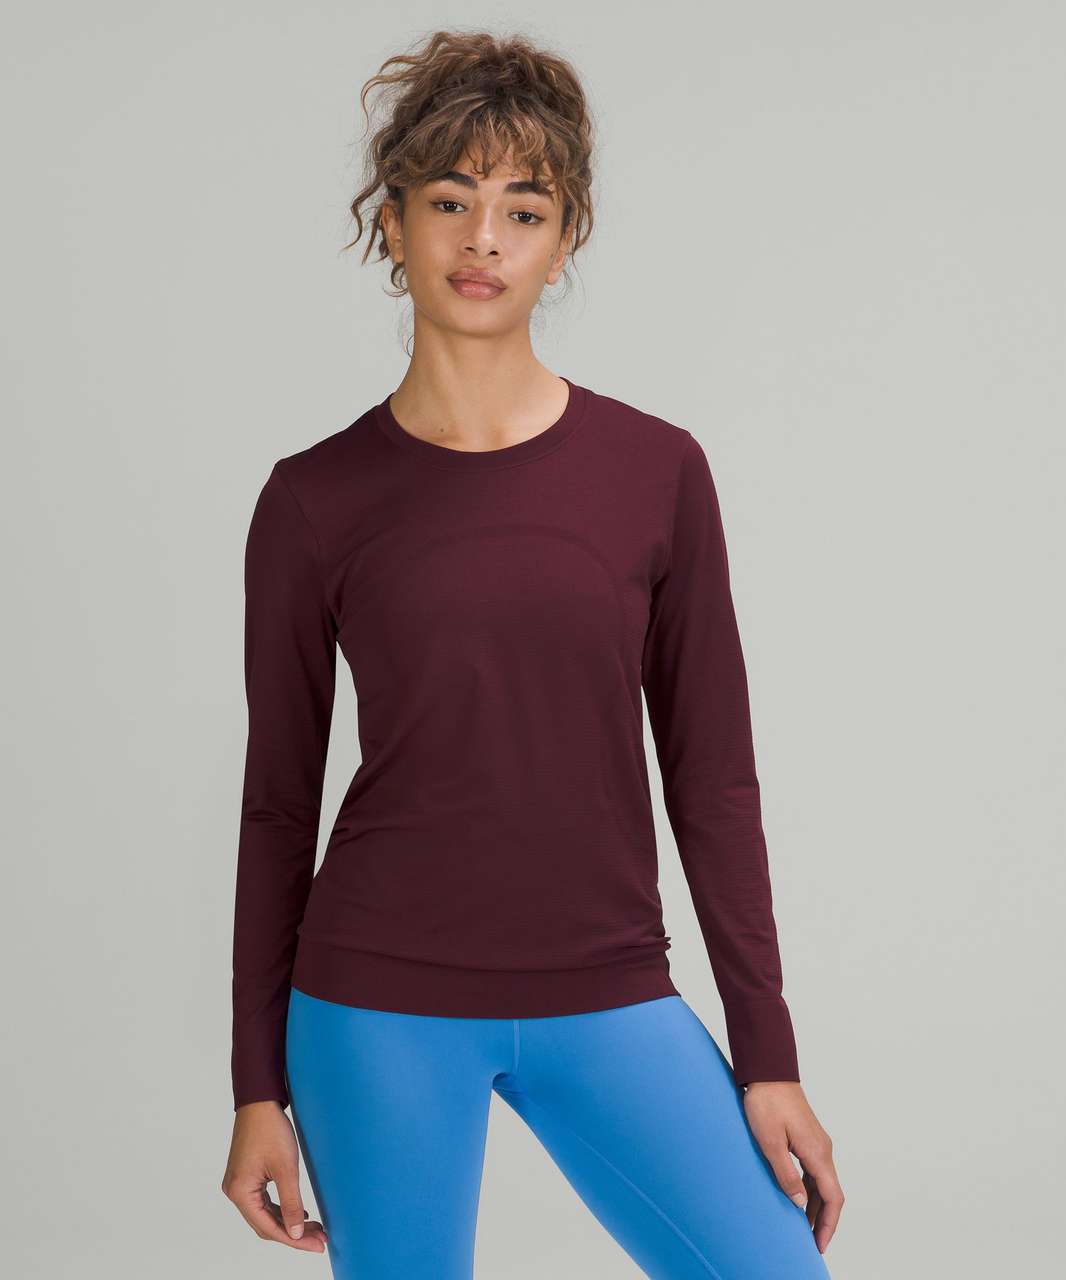 Women's Other Lululemon Swiftly Relaxed Long Sleeve Shirt Reviews